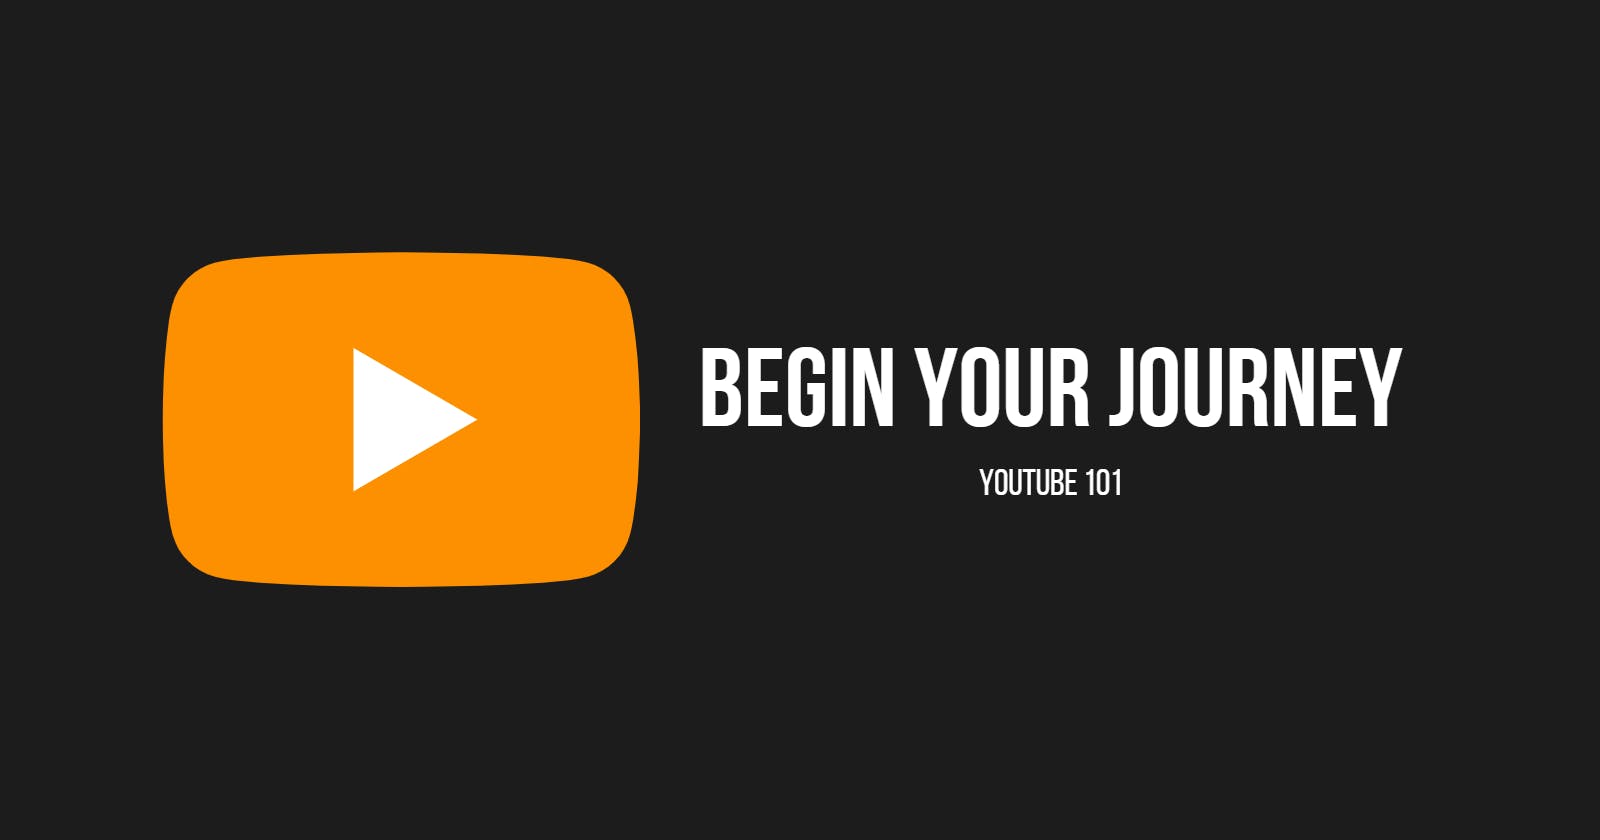 Starting Your YouTube Channel | YouTube 101